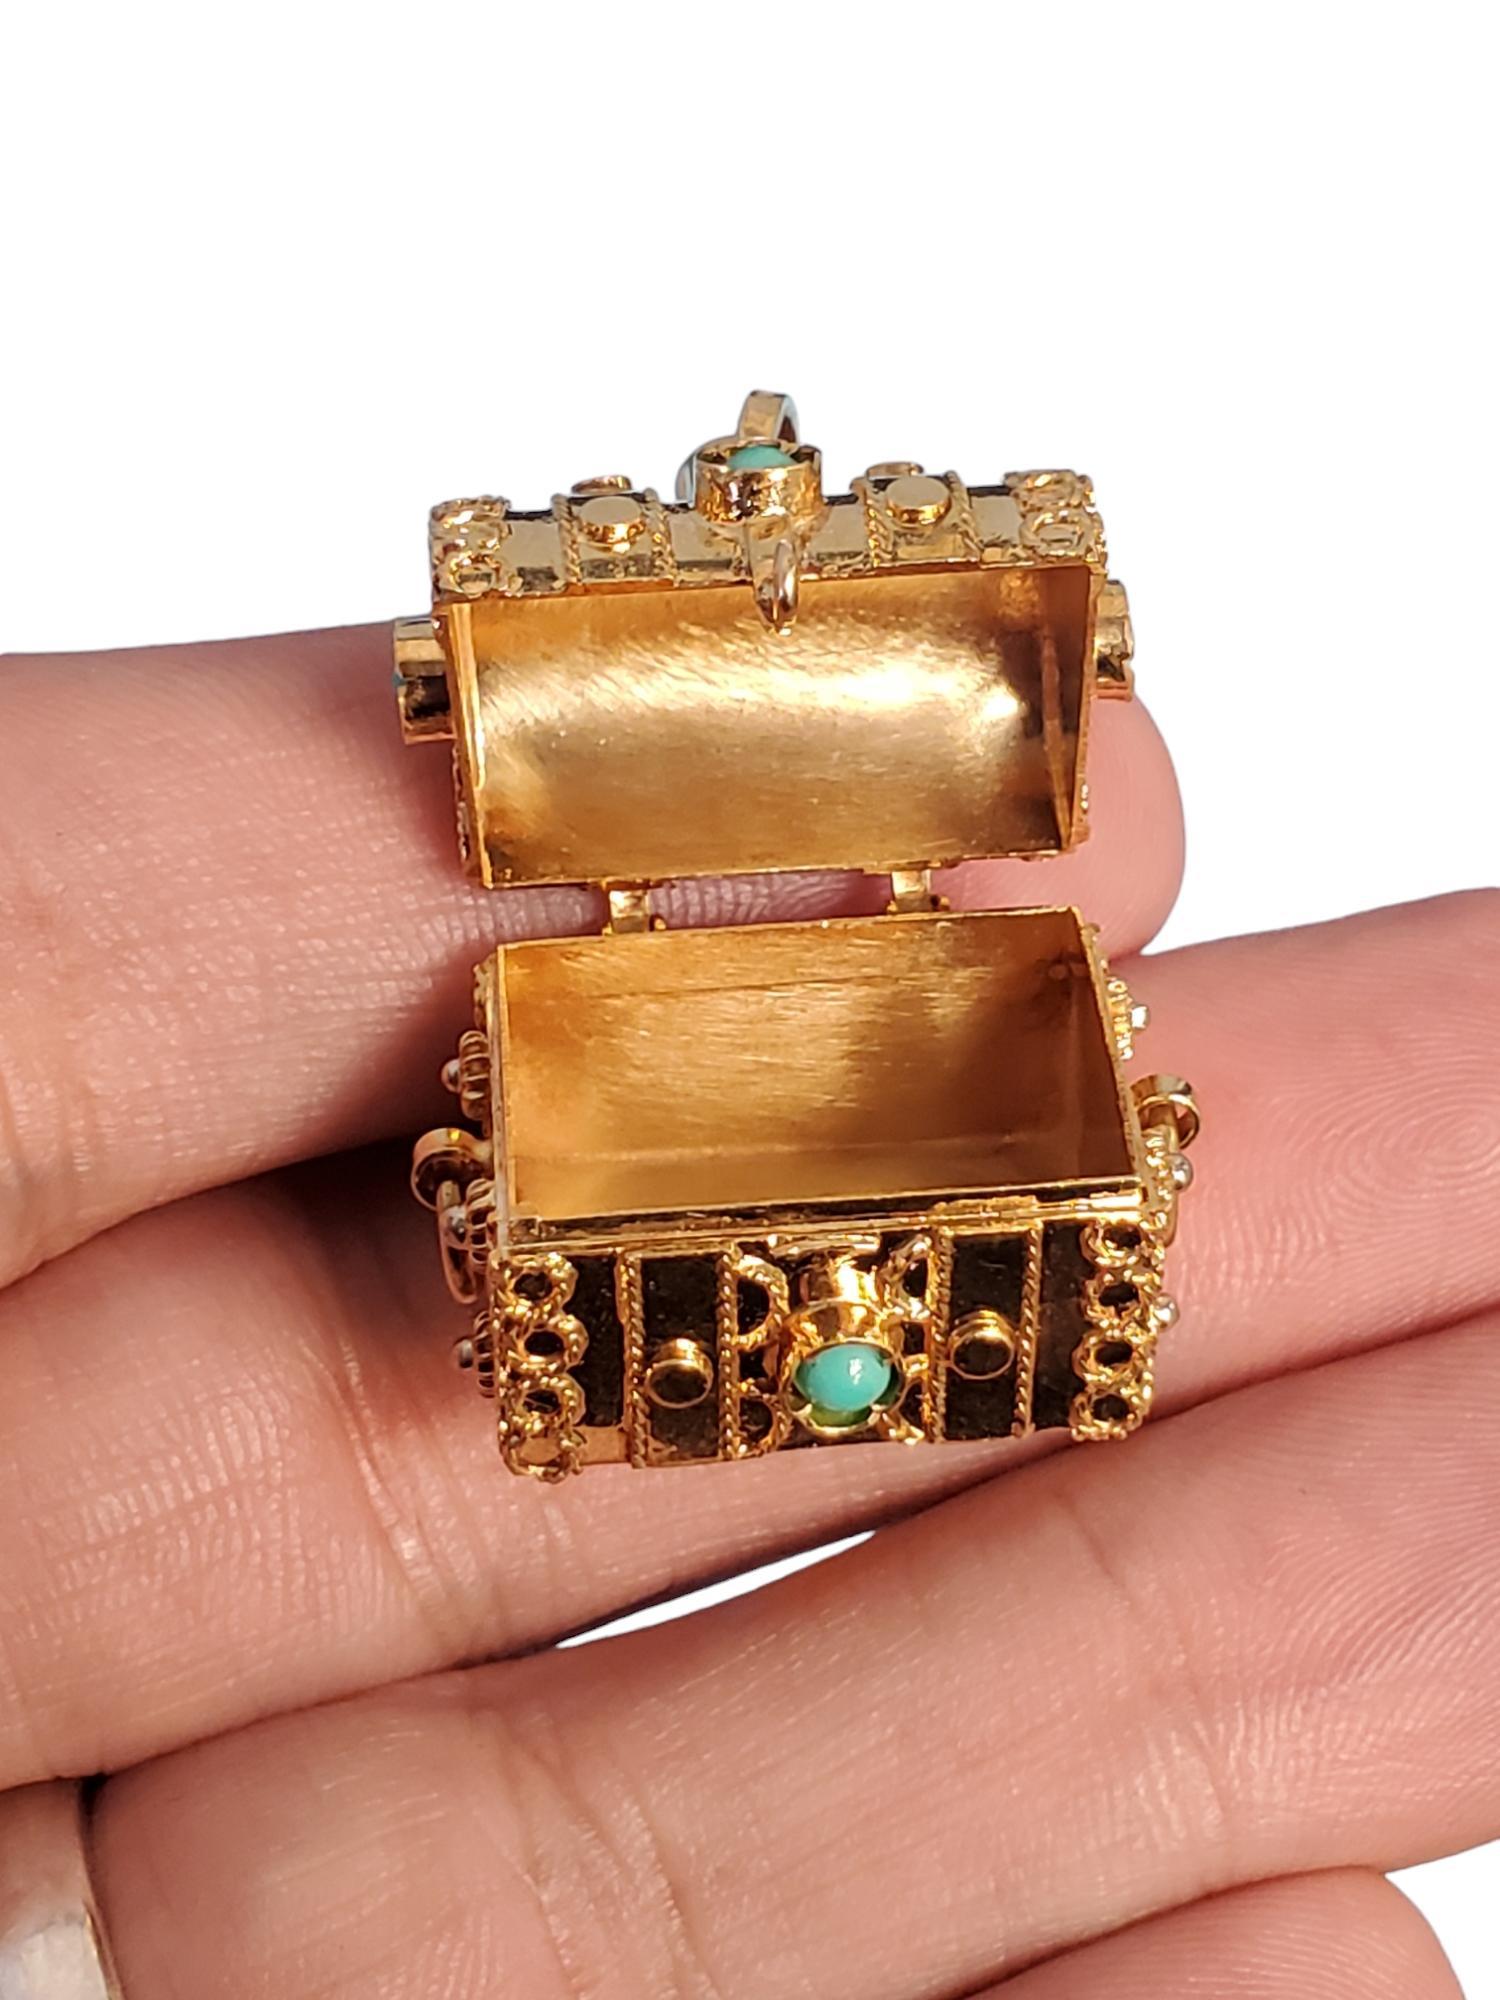 Vintage Treasure Chest Charm Pendant 18k Yellow Gold Turquoise Color Stones In Good Condition For Sale In Overland Park, KS